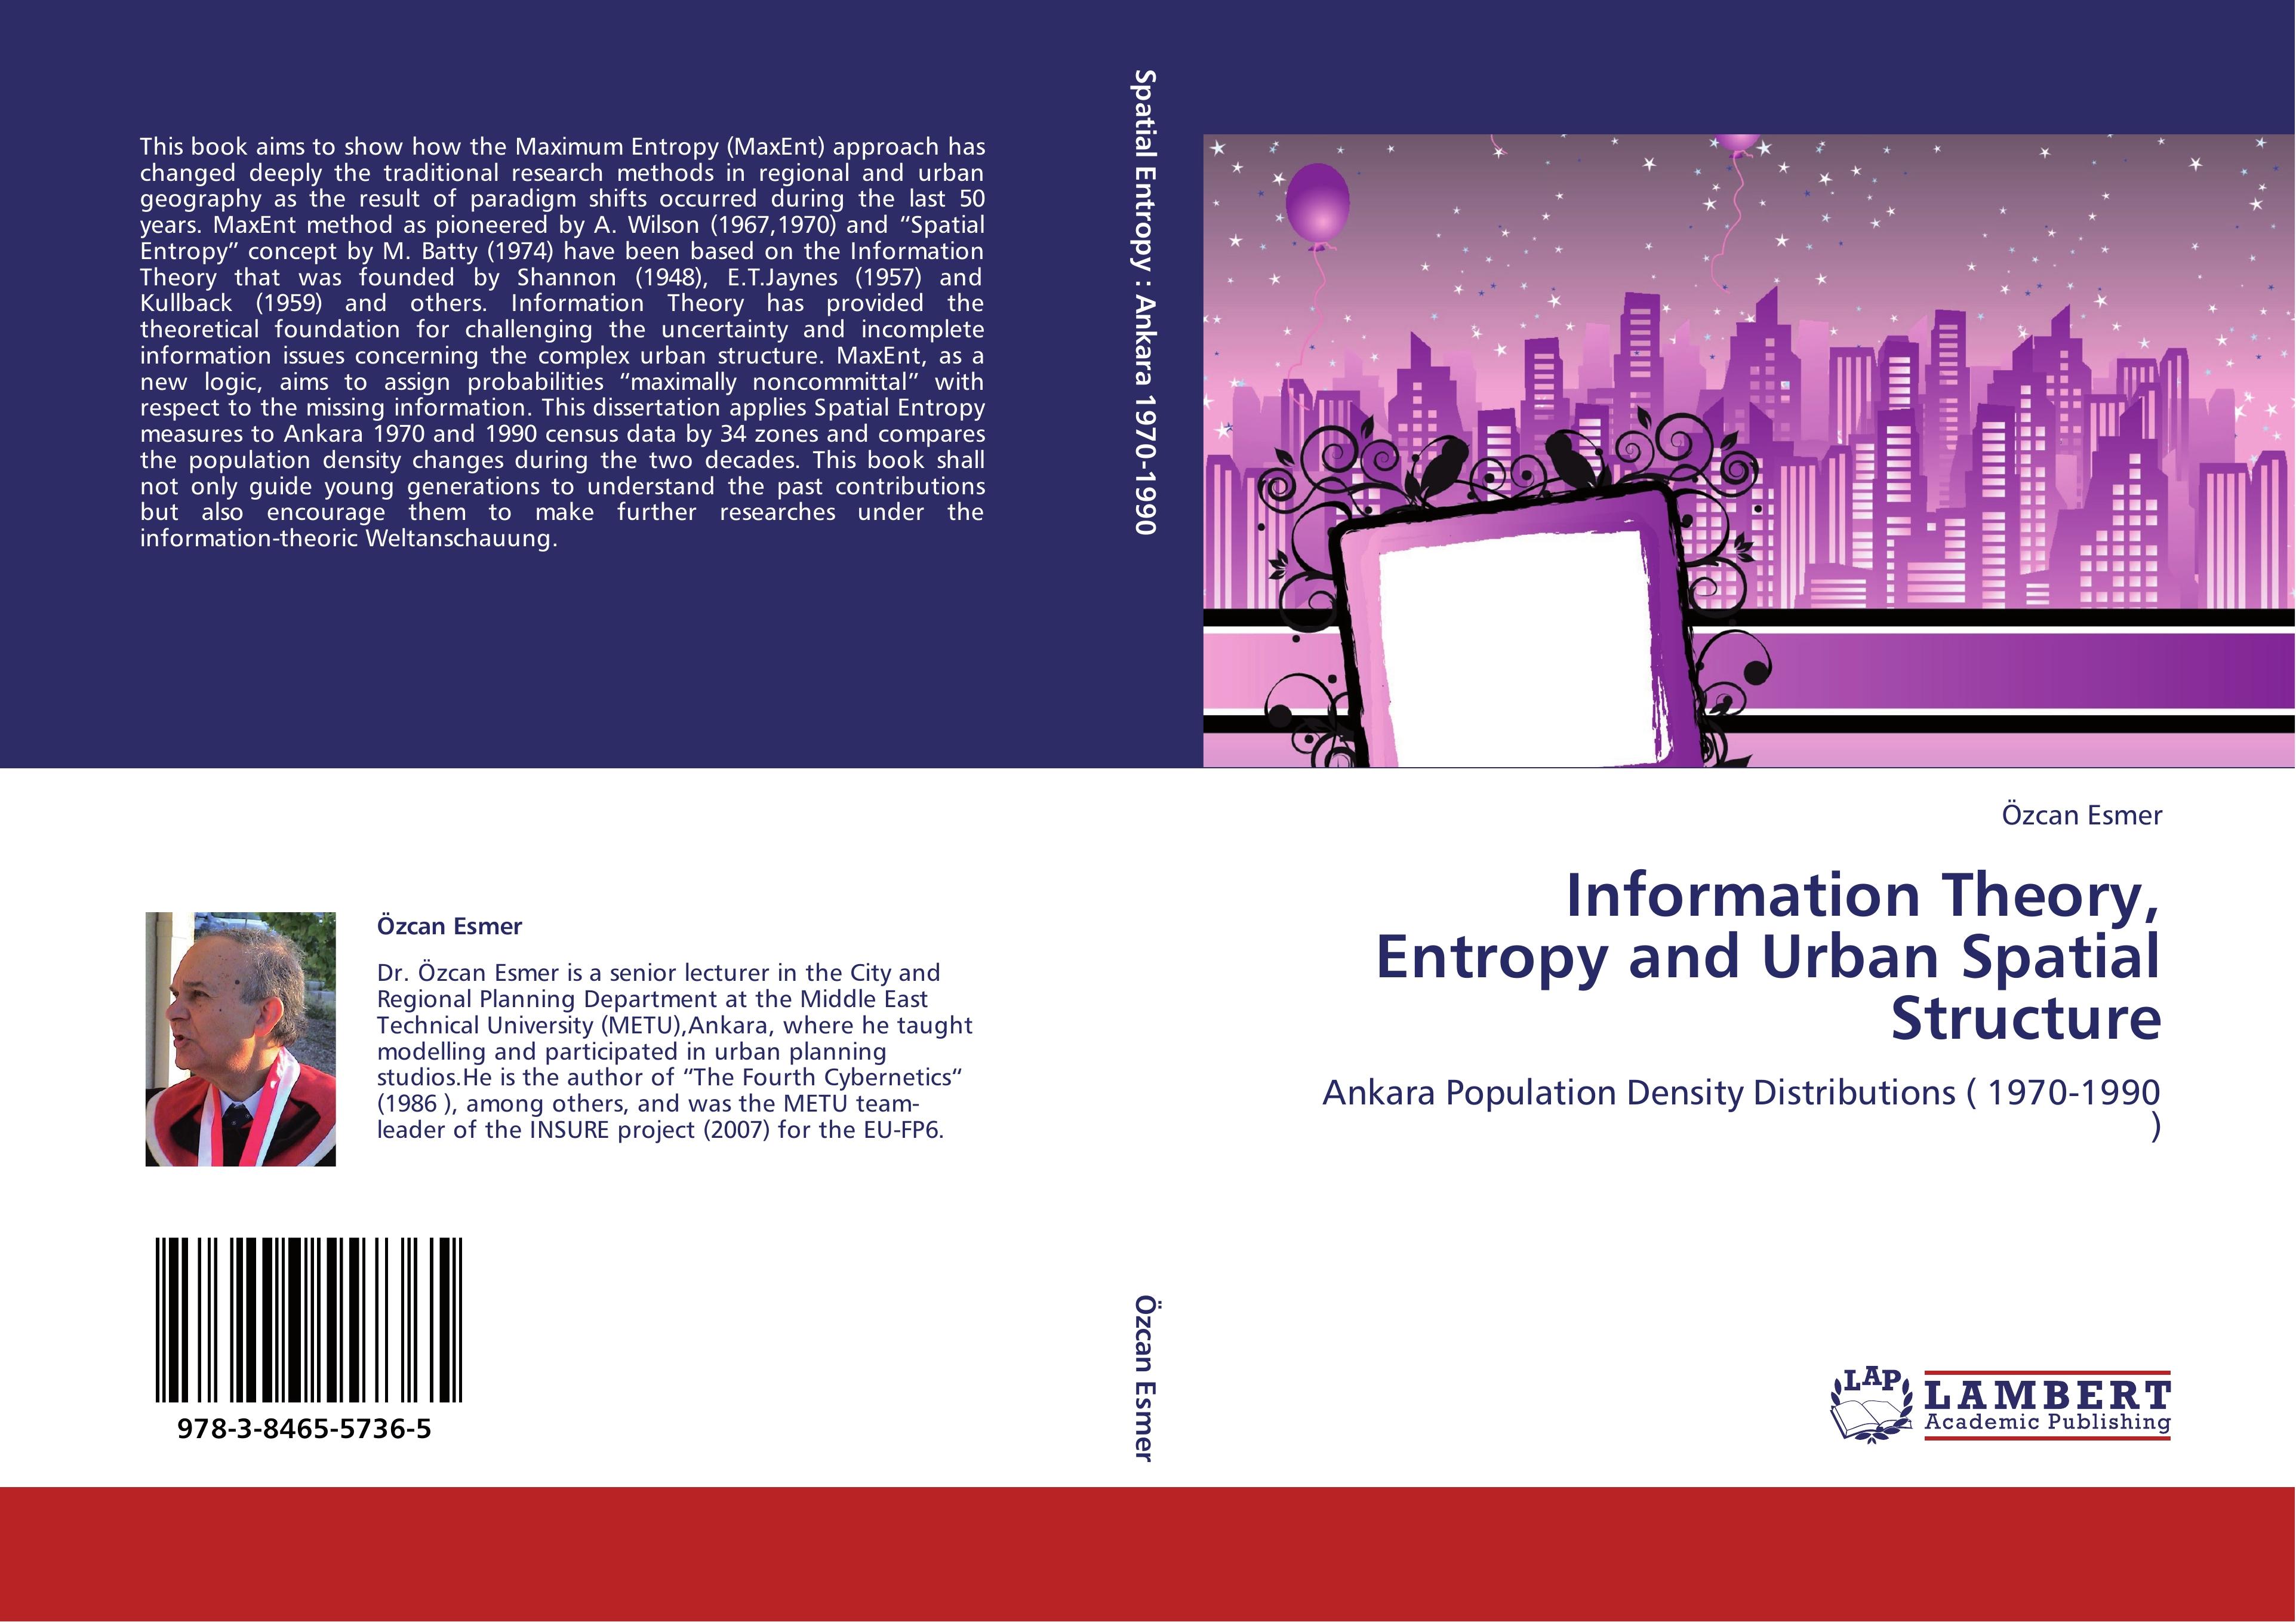 Information Theory, Entropy and Urban Spatial Structure - Oezcan Esmer